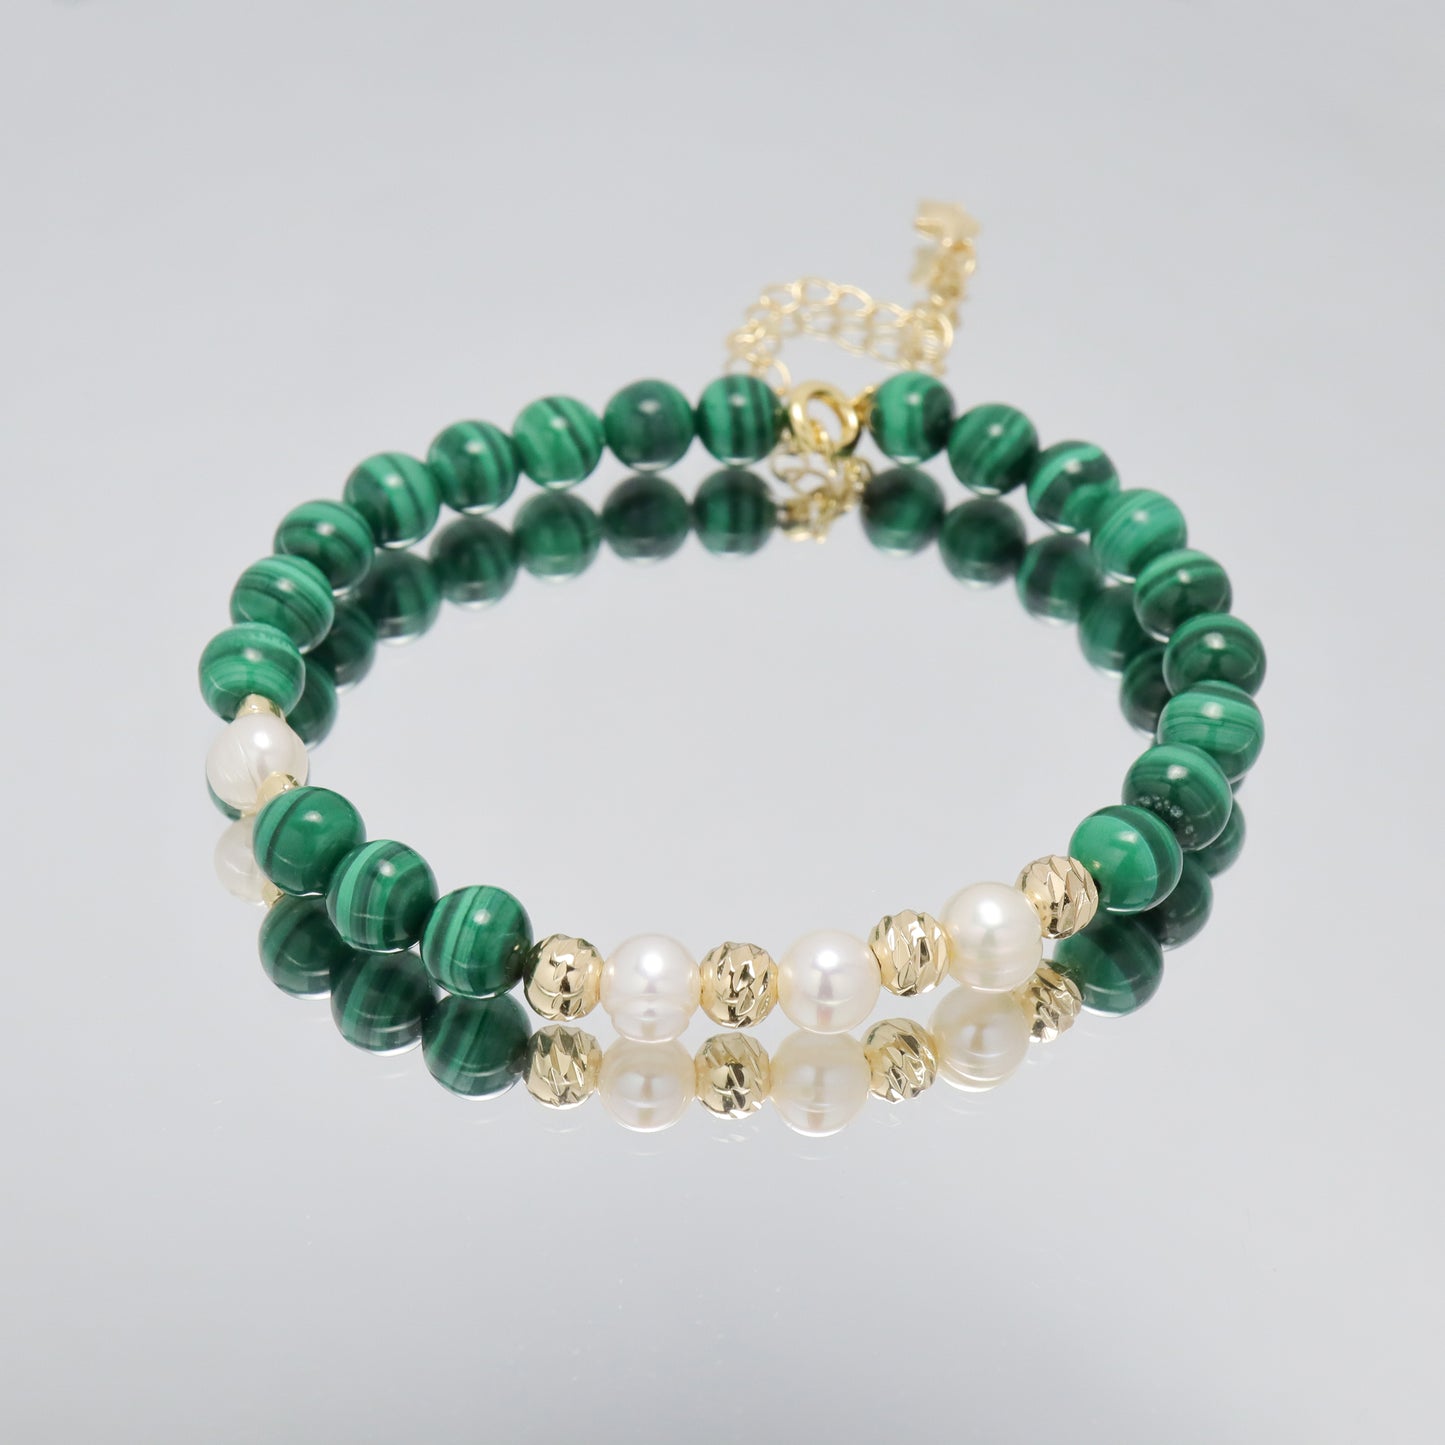 Peacock Pride -  Malachite & Freshwater Pearl Bracelet with Adjustable Chain